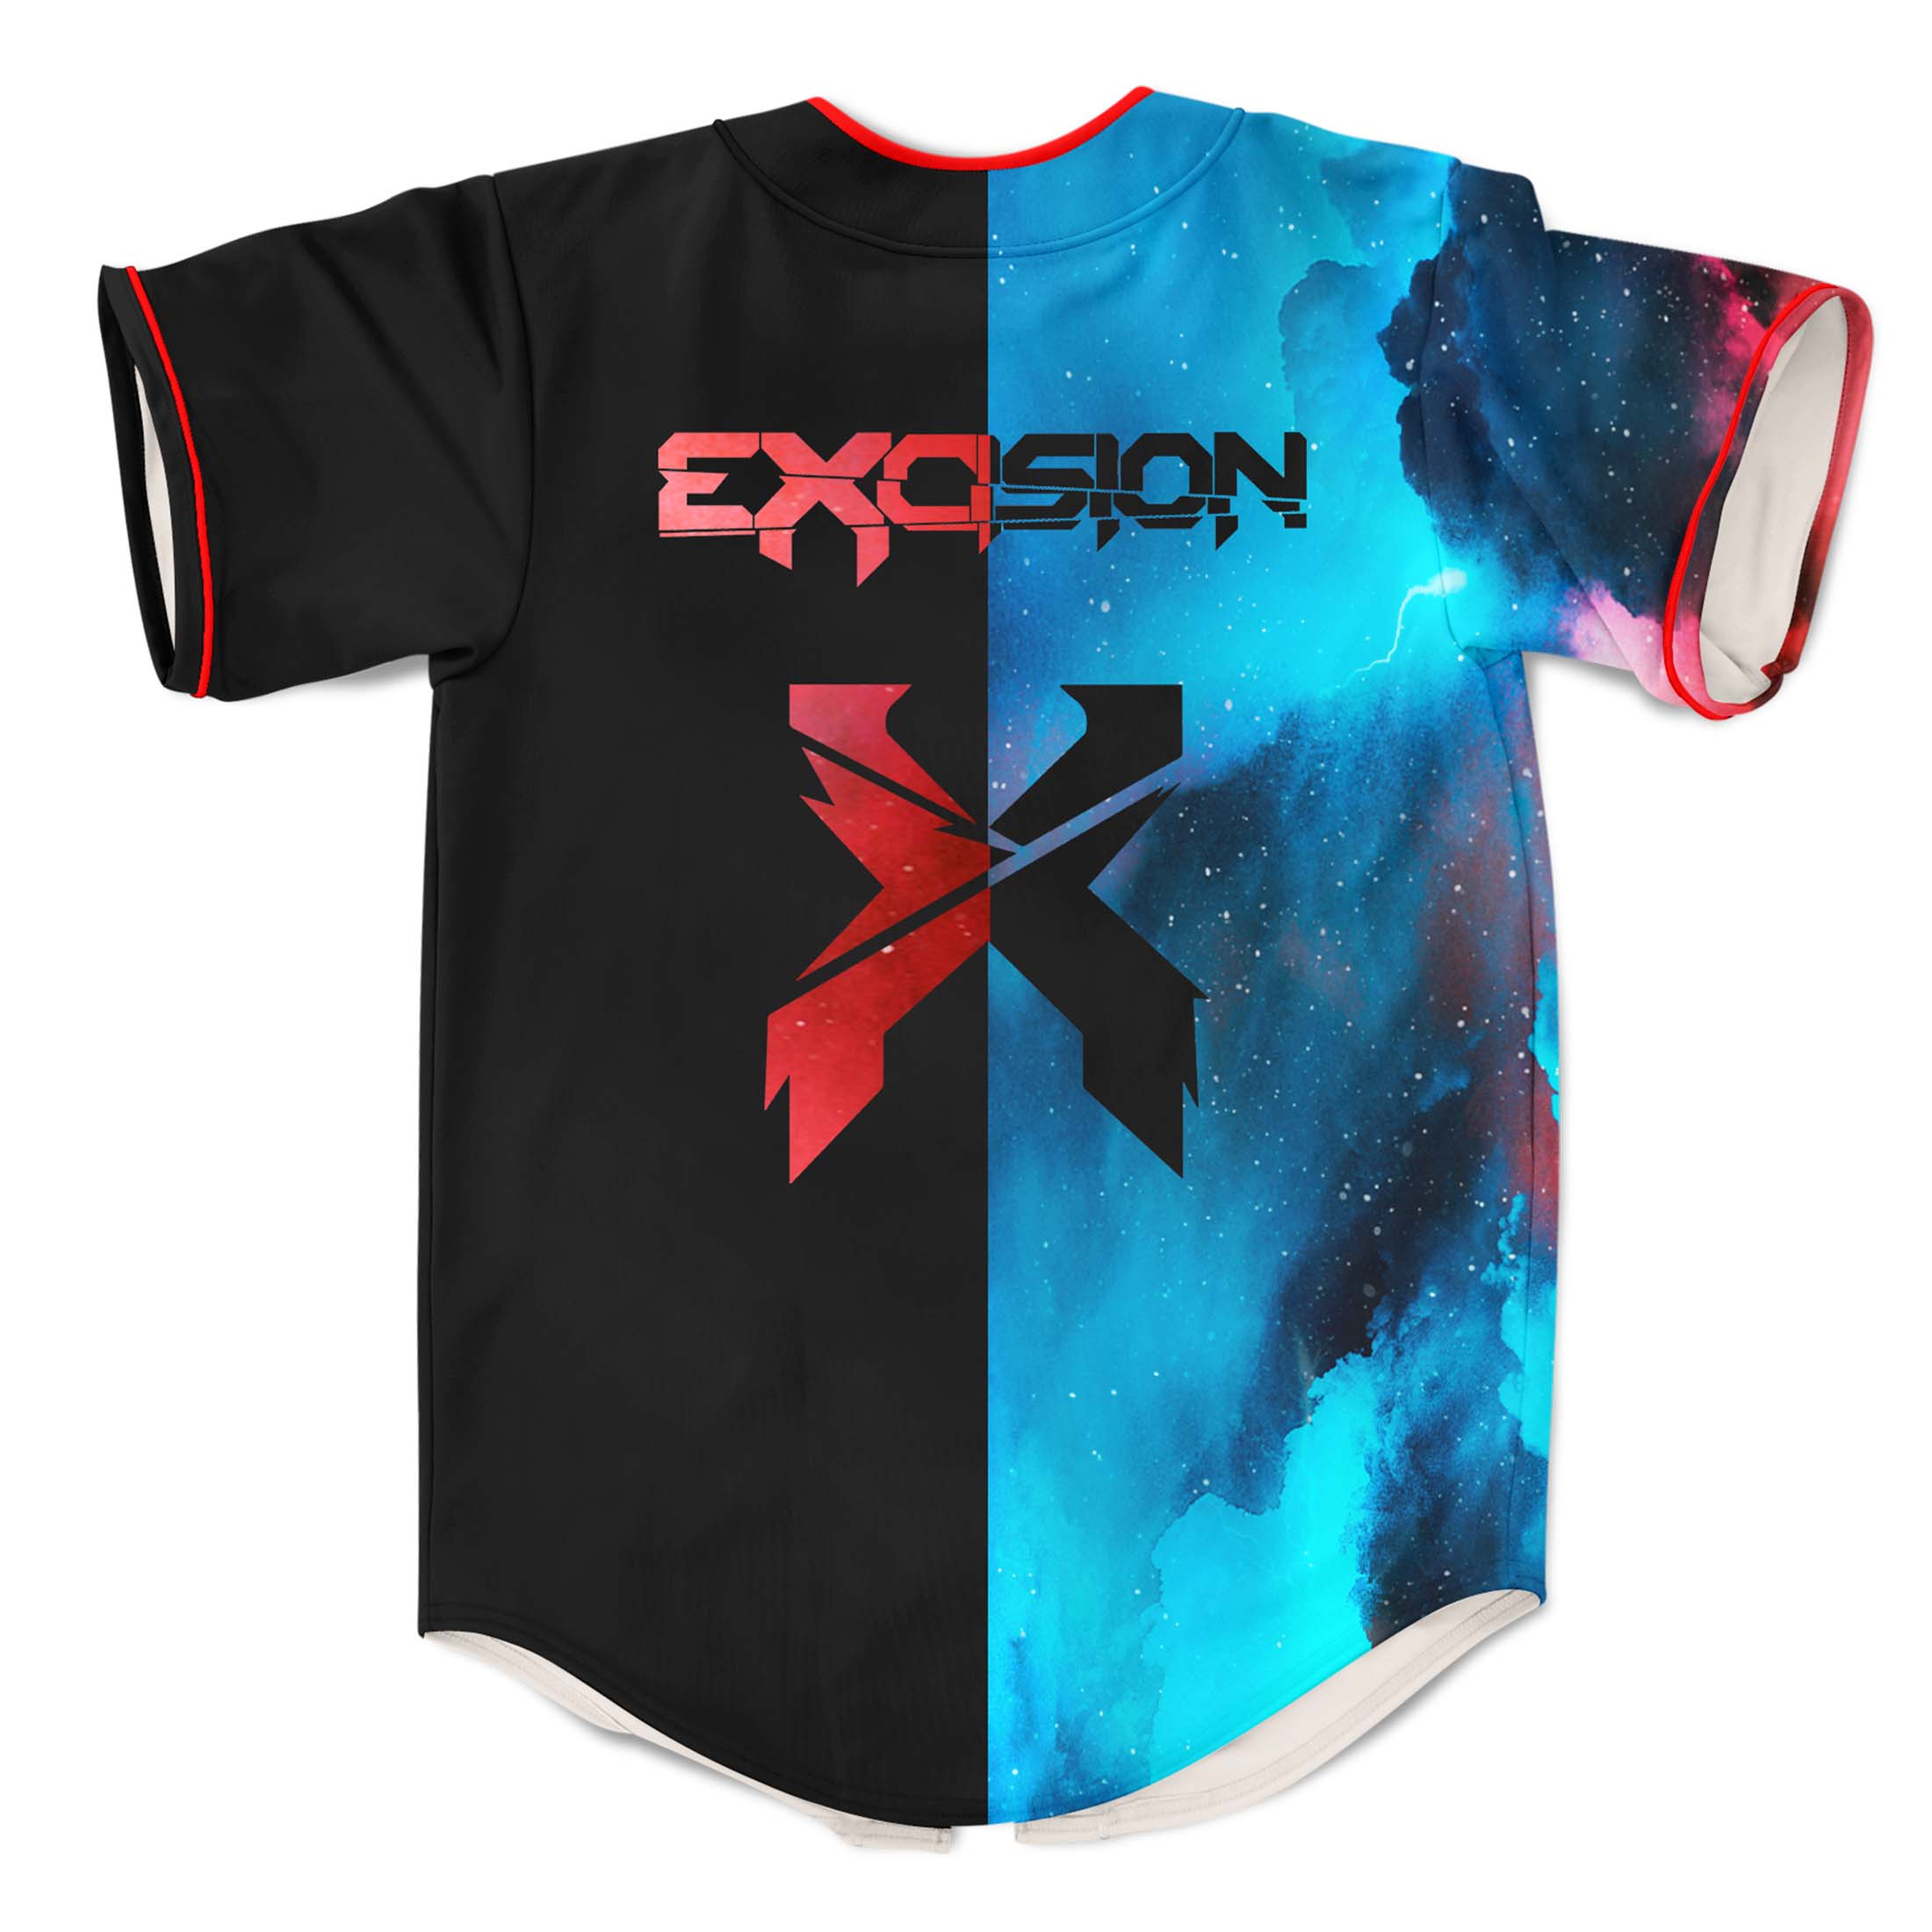 NEW Excision Bloody Rave EDM Festival Baseball Jersey - USALast